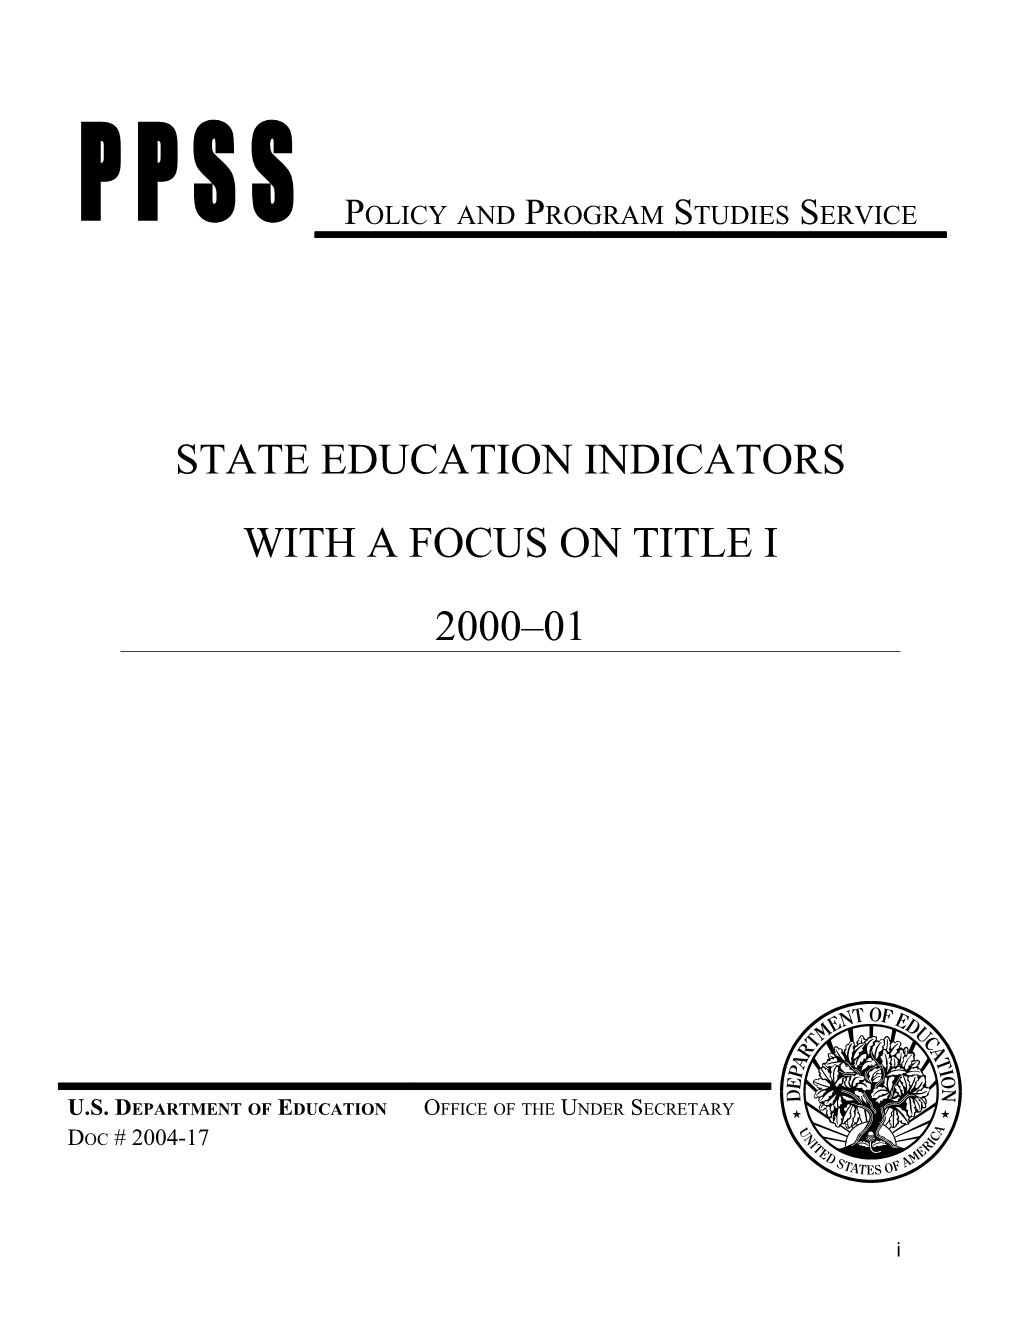 Introduction State Education Indicators with a Focus on Title I: 2000-01 (2004) (Msword)